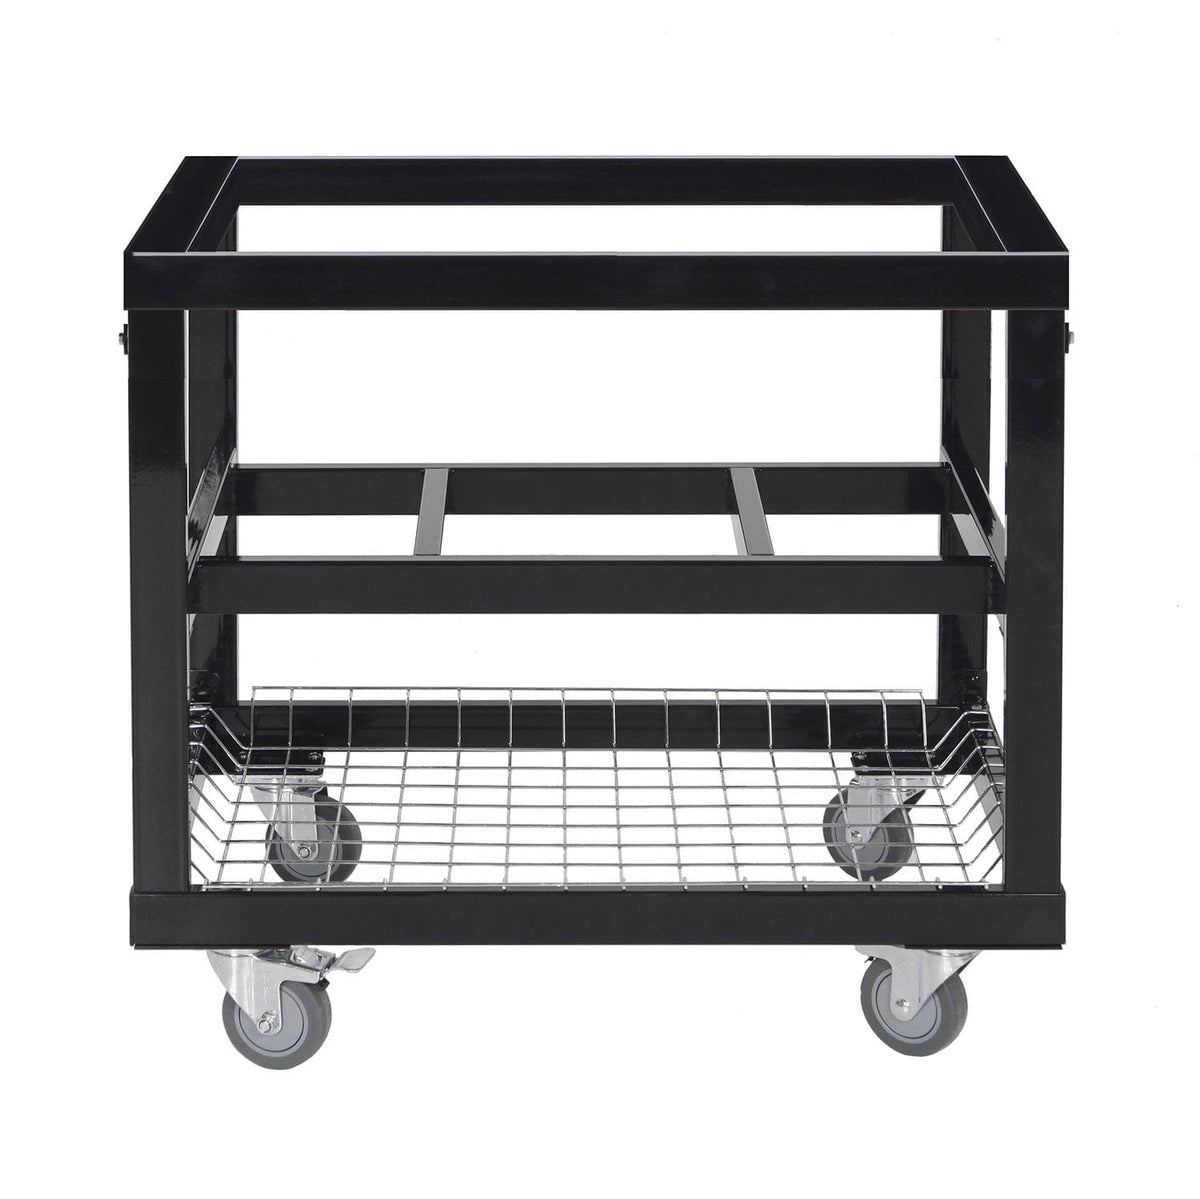 Primo Accessories Oval LG 300 / Oval XL 400 Primo Grill Cart Base with Basket for Oval LG 300, XL 400, &amp; Oval JR 200 / PG00368 or PG00318